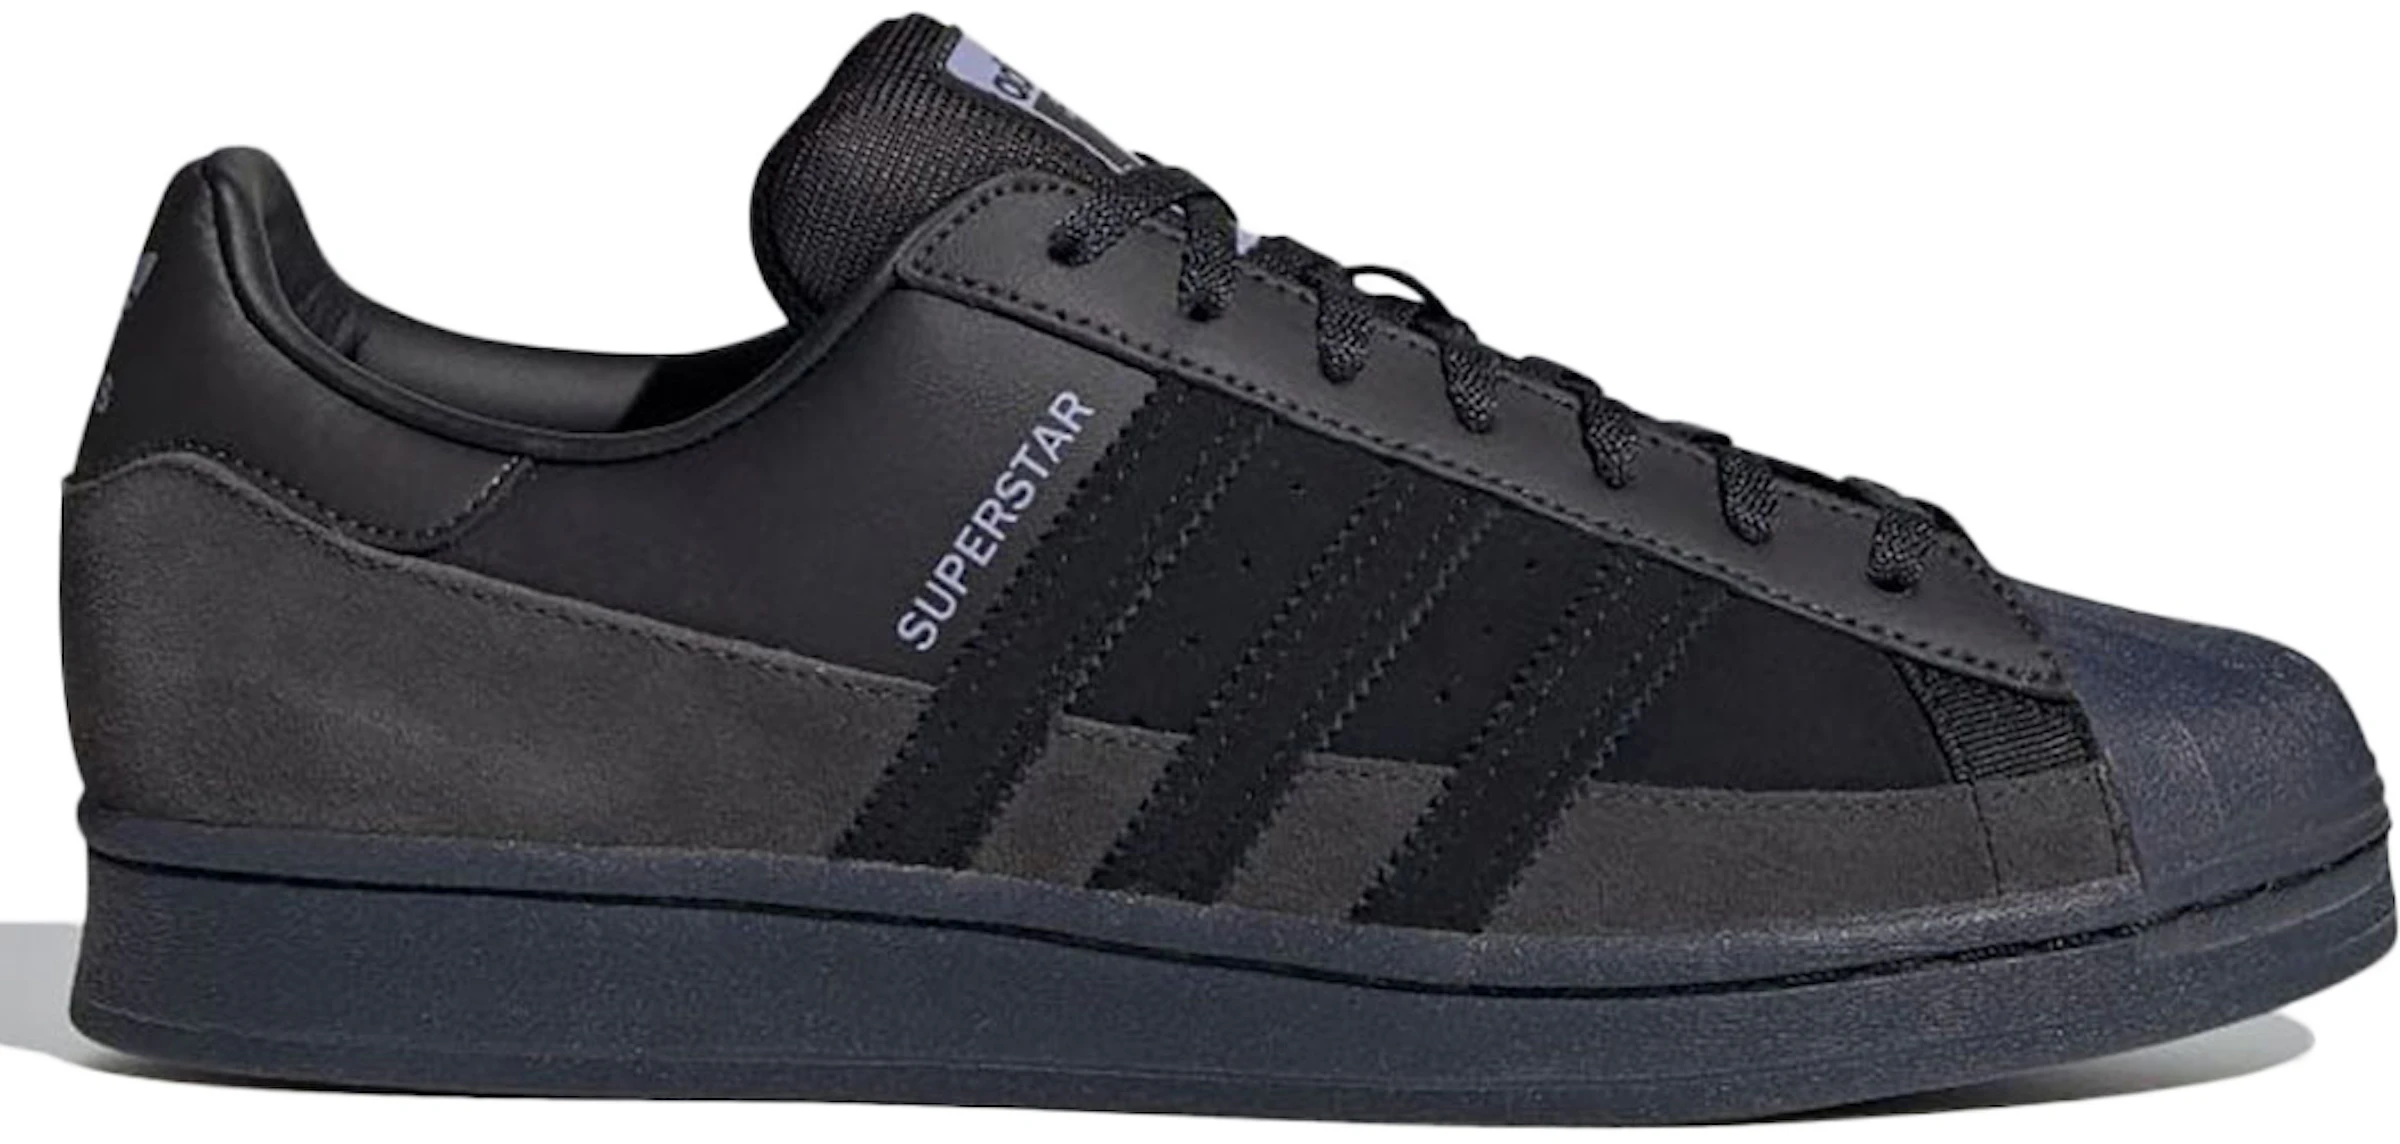 Besmetten Afsnijden Reageer adidas Superstar Smooth Leather and Suede - FX5564 - US